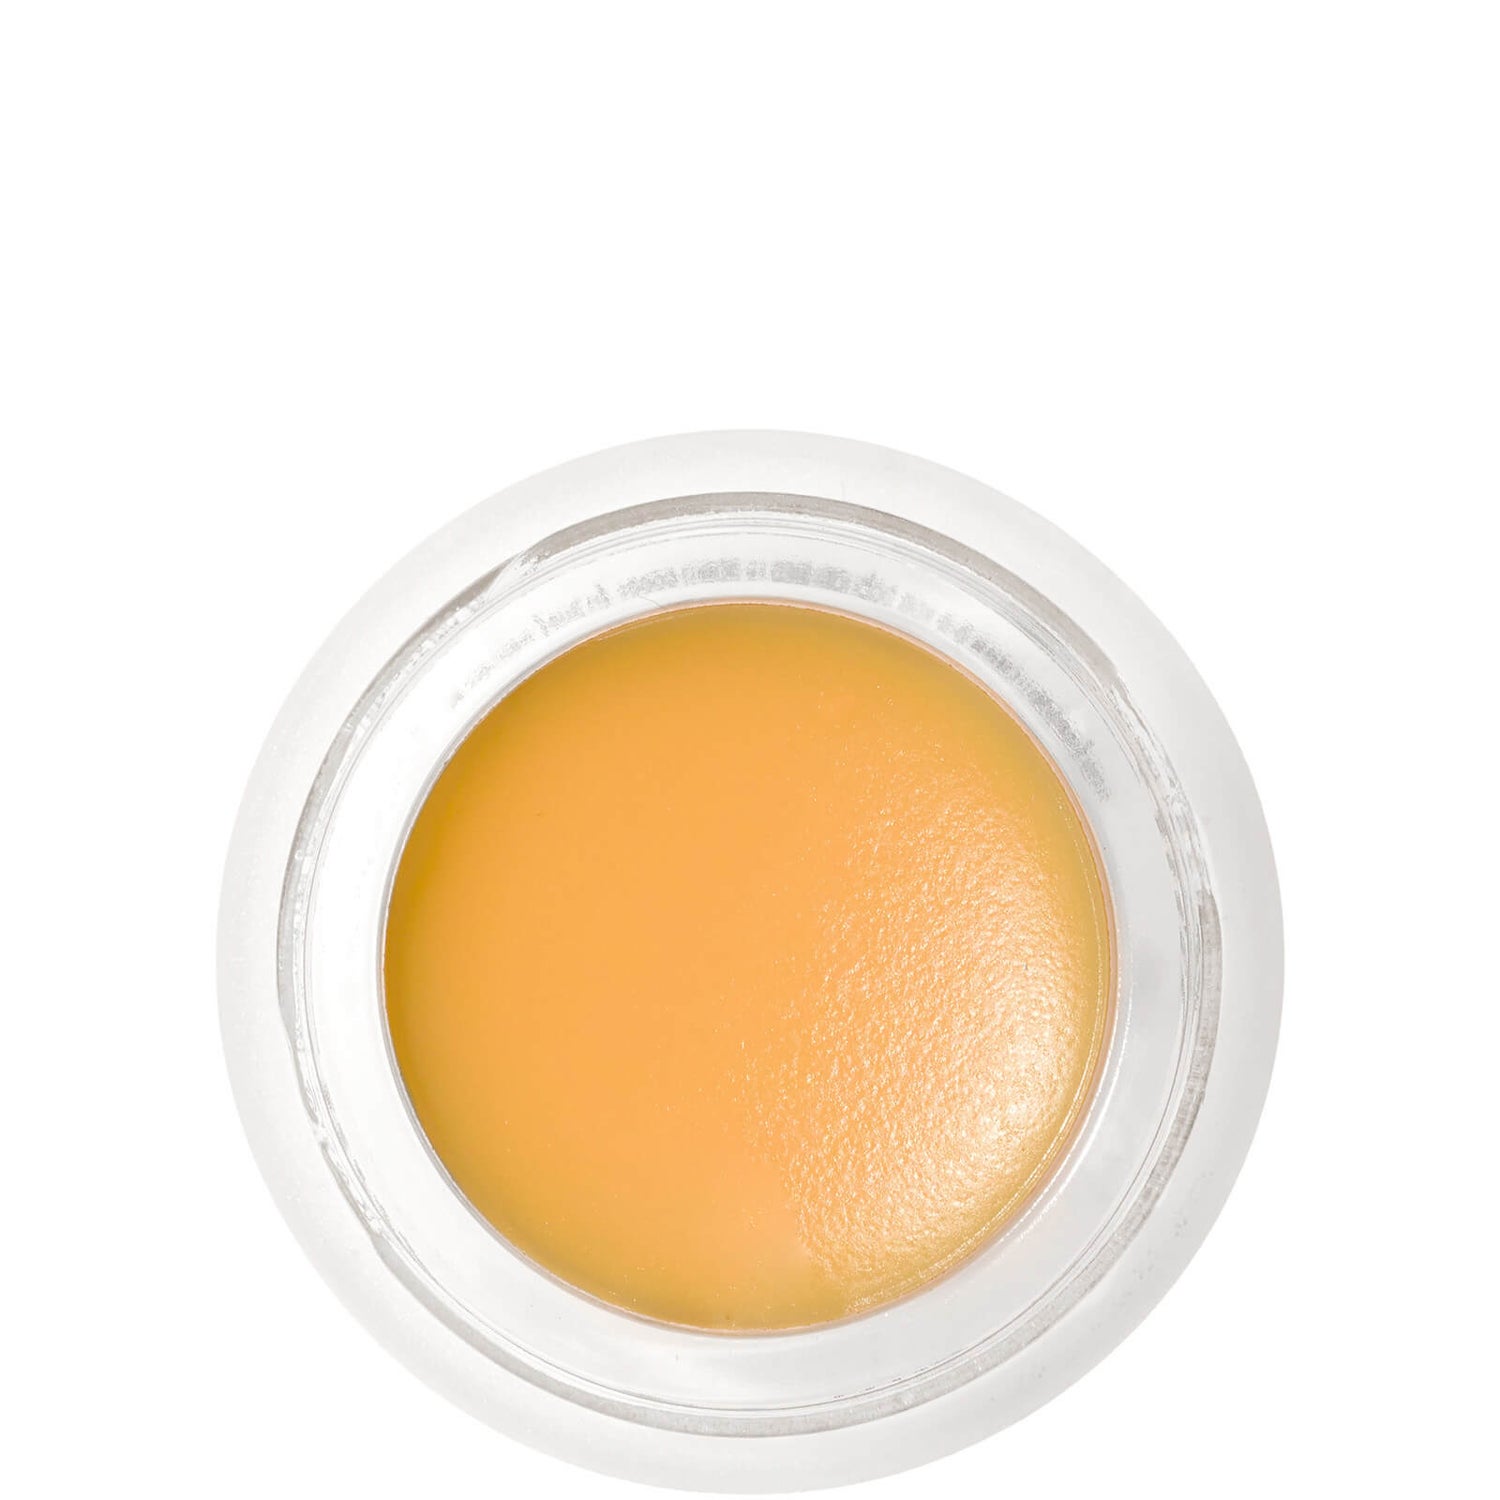 RMS Lip and Skin Balm - Simply Cocoa